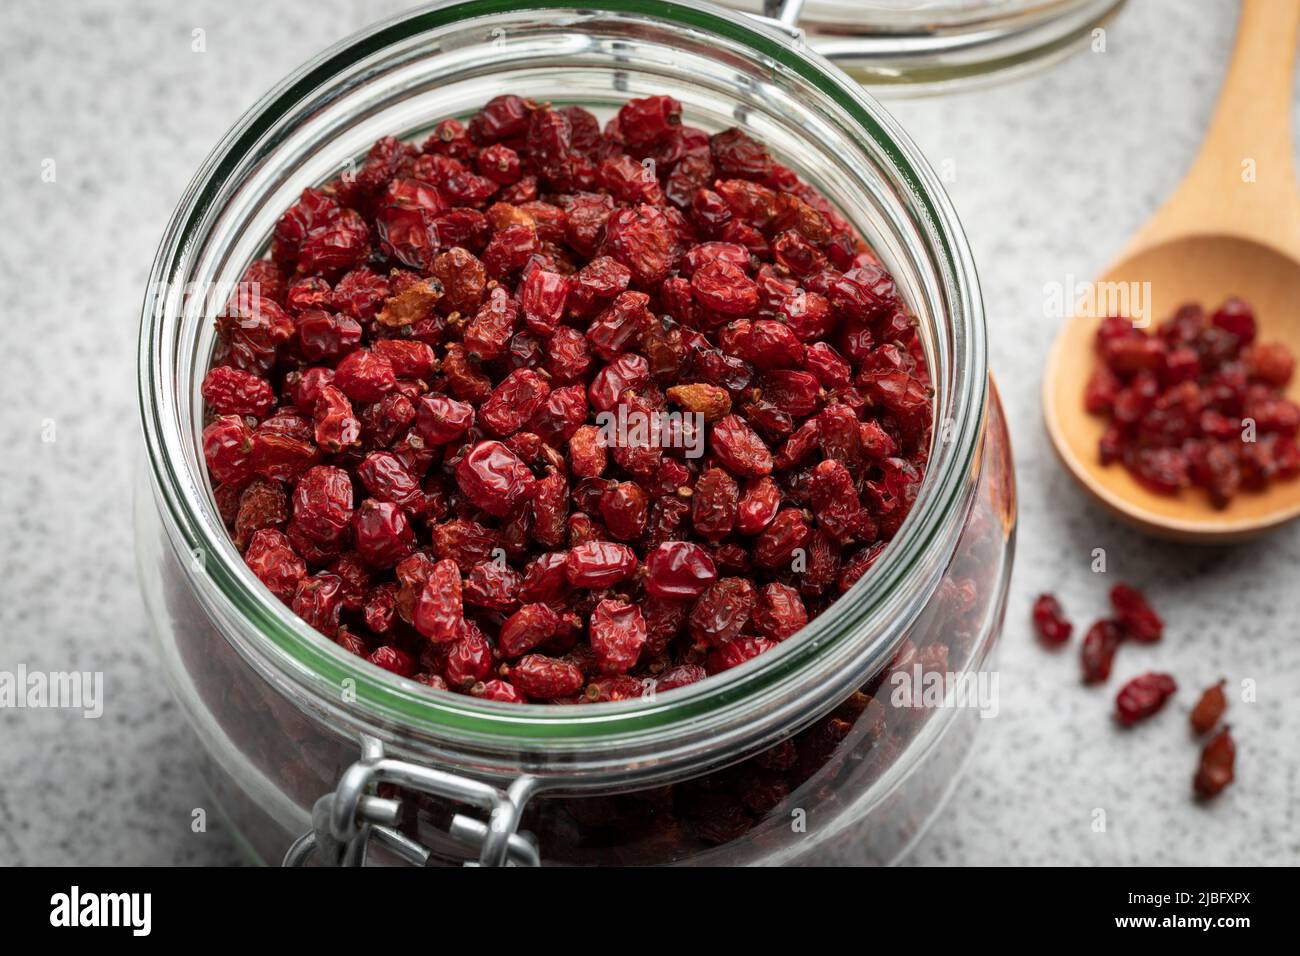 Glass jar with dried red Iranian barberries close up Stock Photo